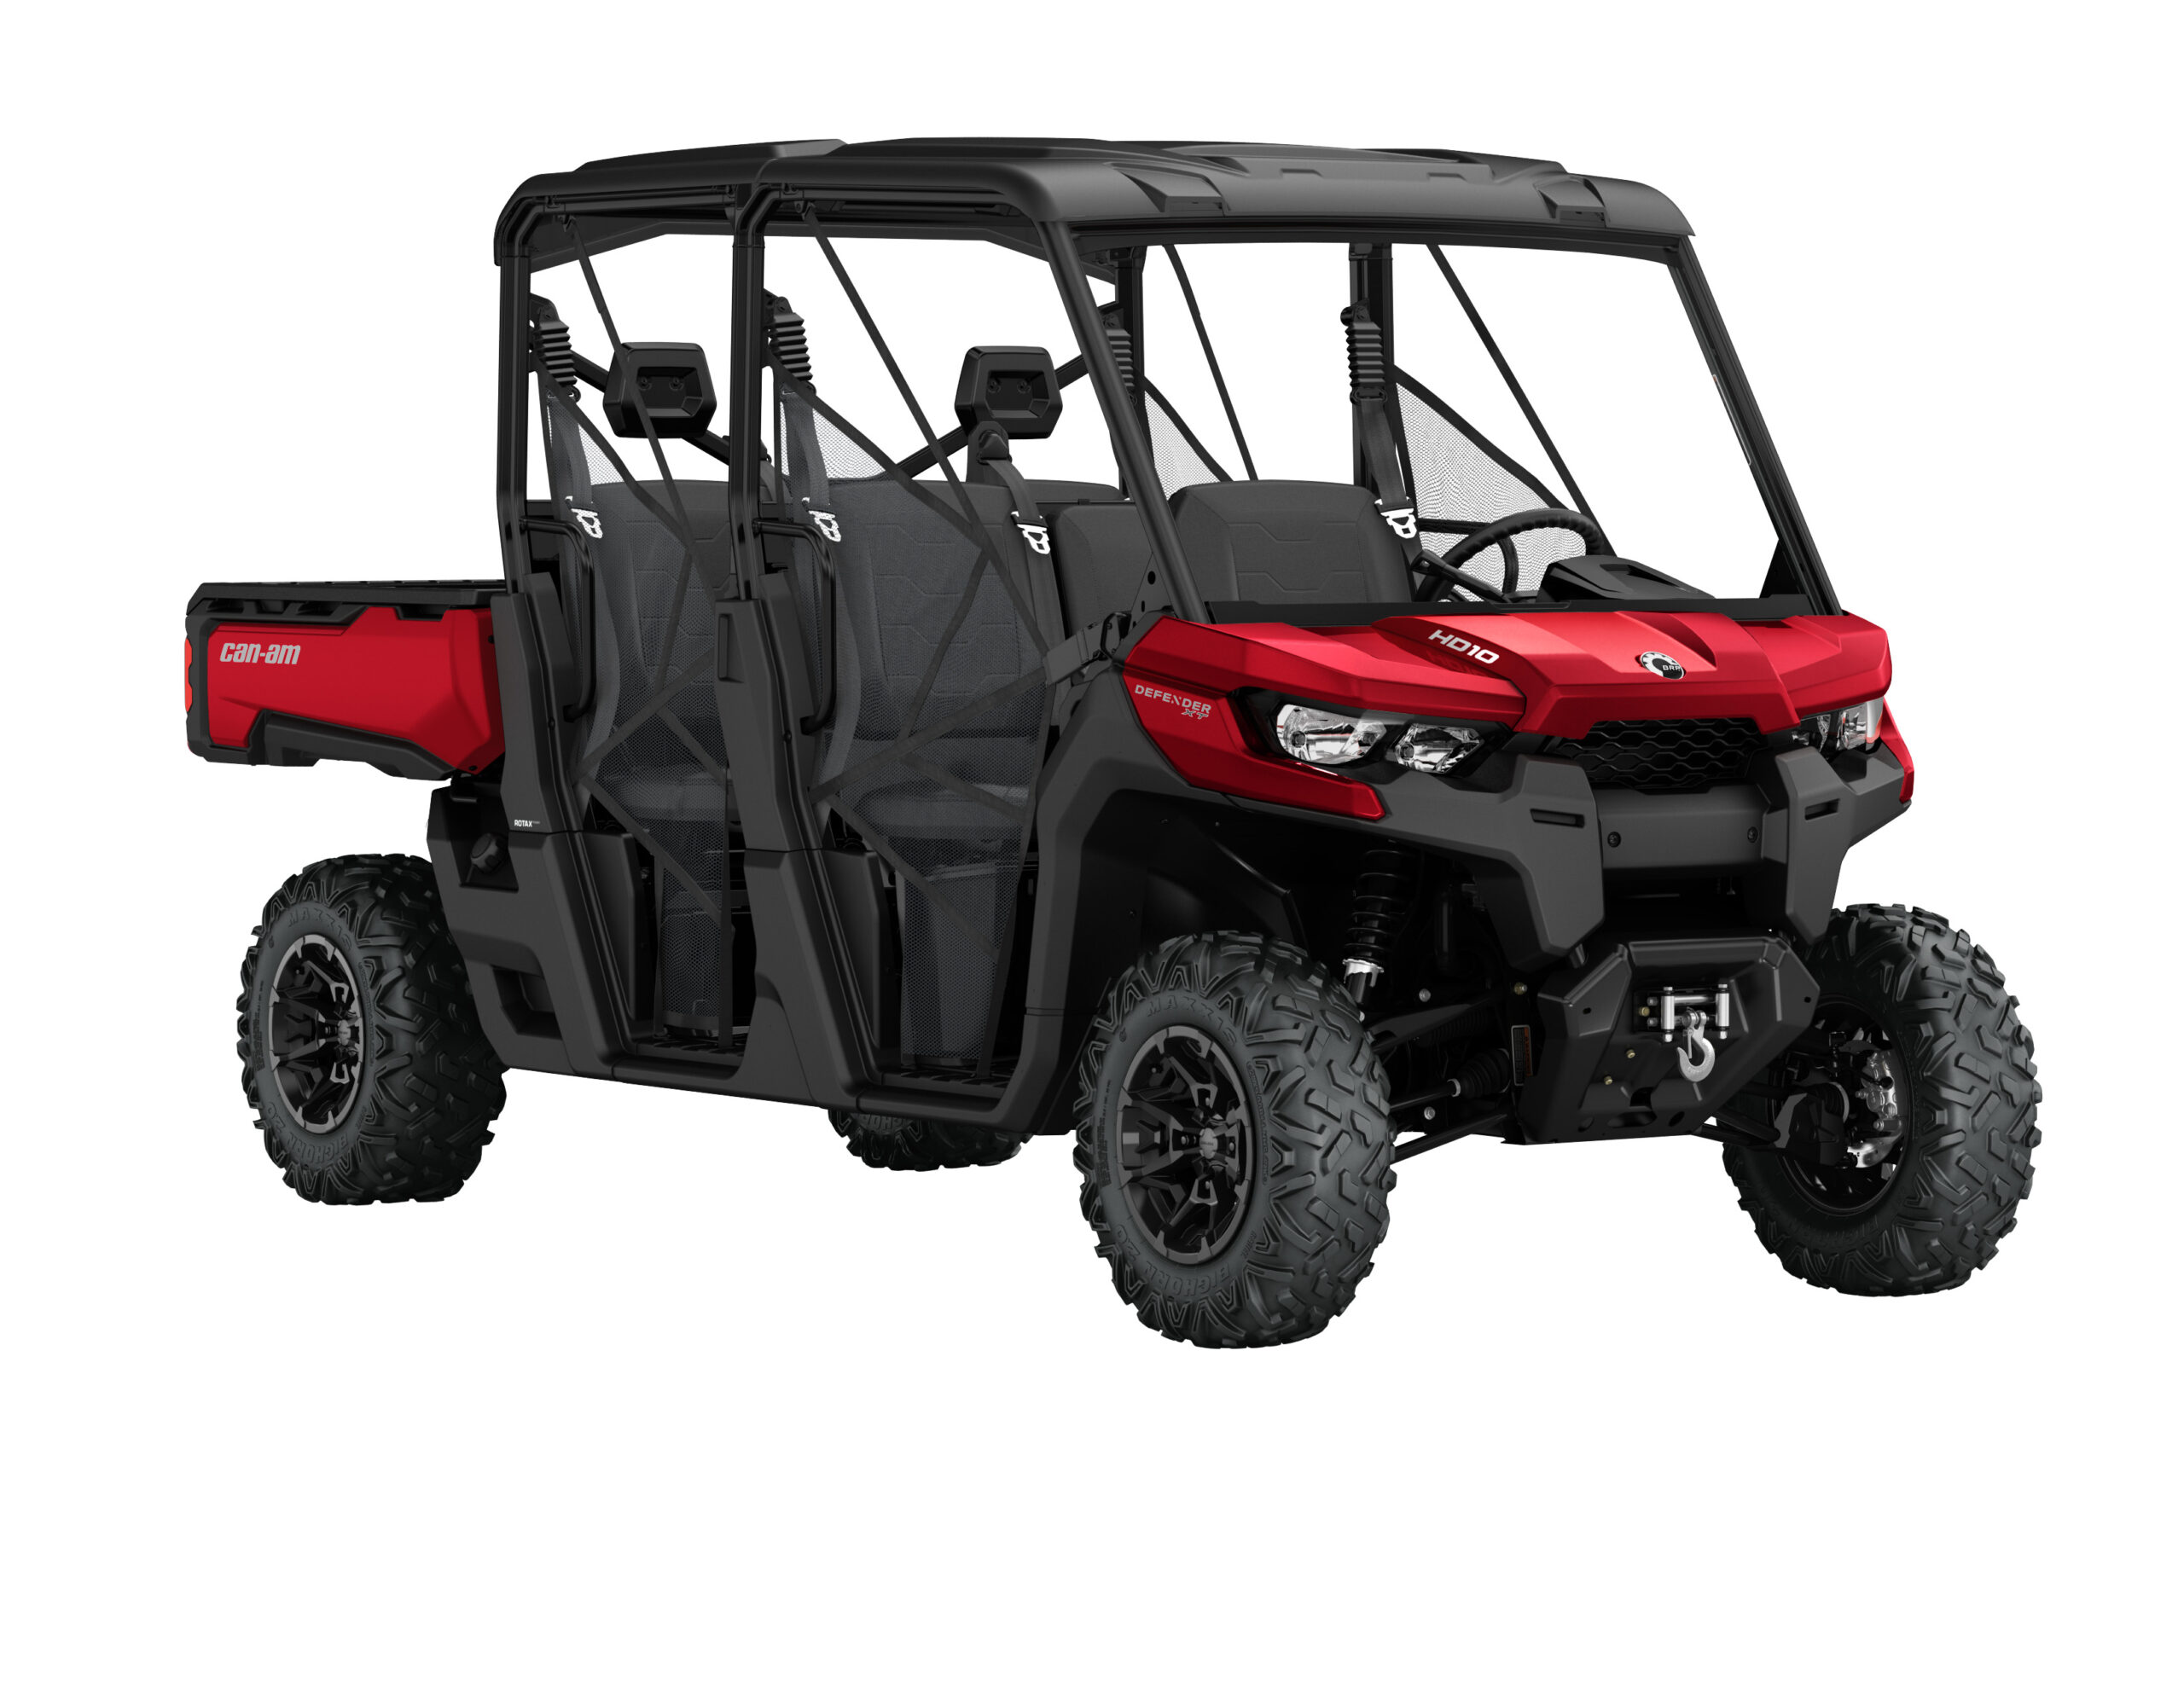 BRP’S NEW SIX-PASSENGER CAN-AM DEFENDER MAX FAMILY OF VEHICLES REIMAGINES THE UTILITY SIDE-BY-SIDE CATEGORY